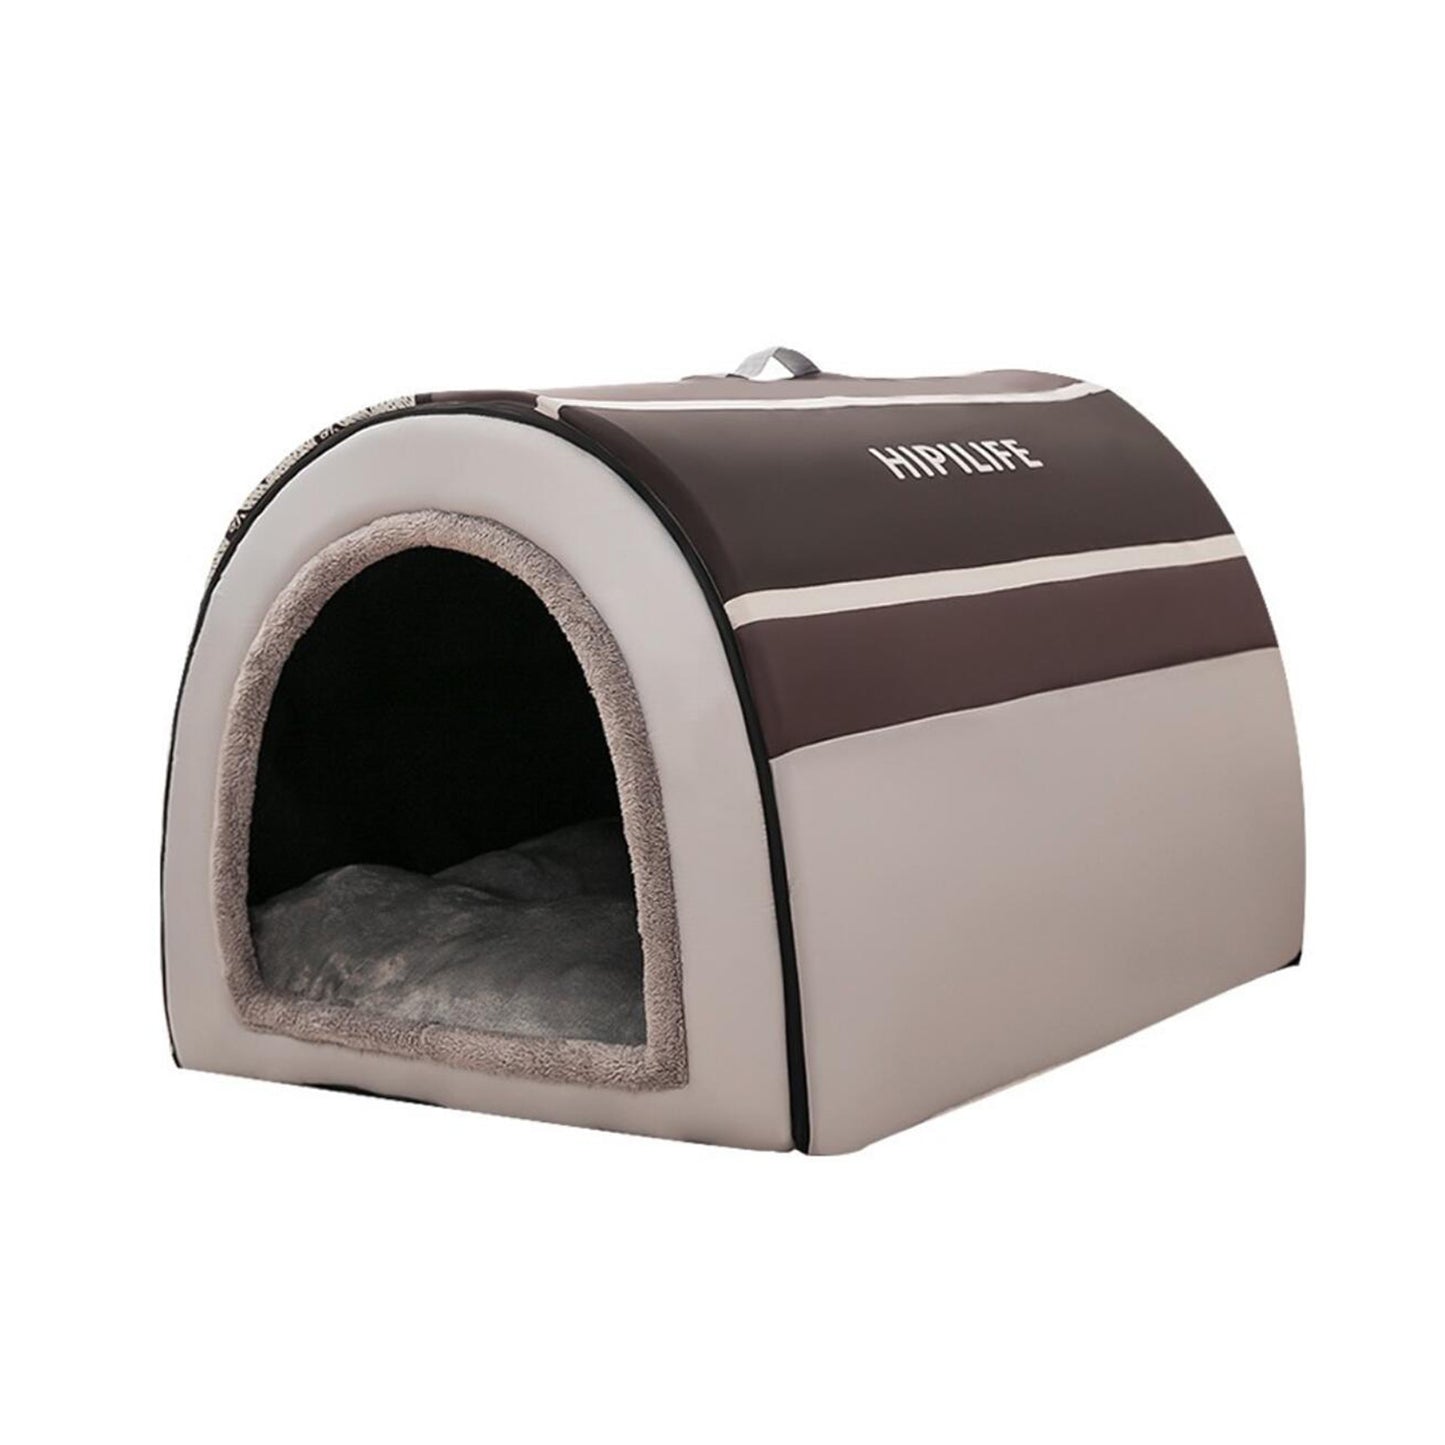 MEGAWHEELS Warm Winter Large Dog House, Removable and Washable, Indoor